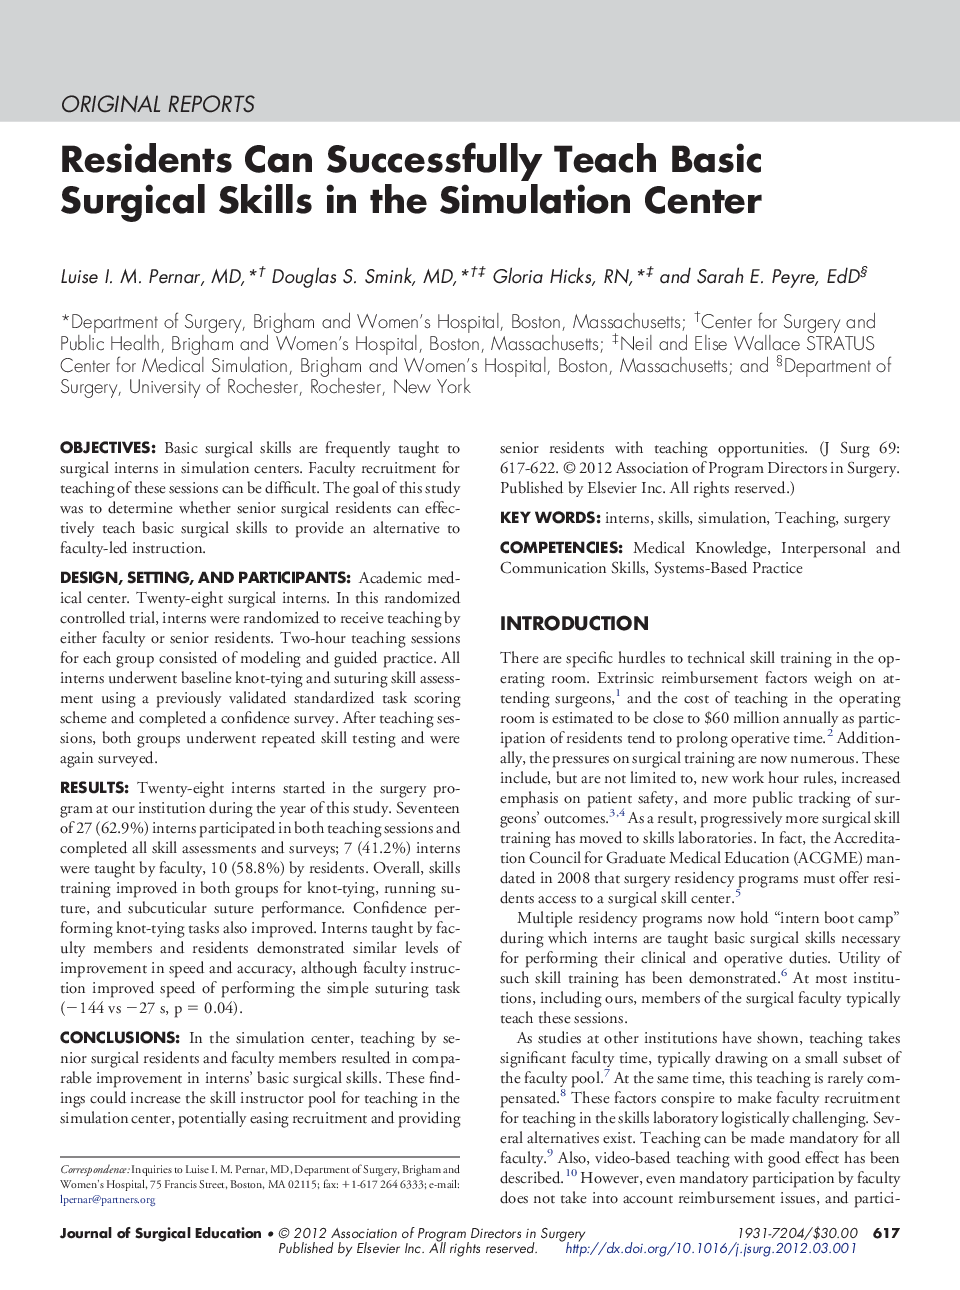 Residents Can Successfully Teach Basic Surgical Skills in the Simulation Center